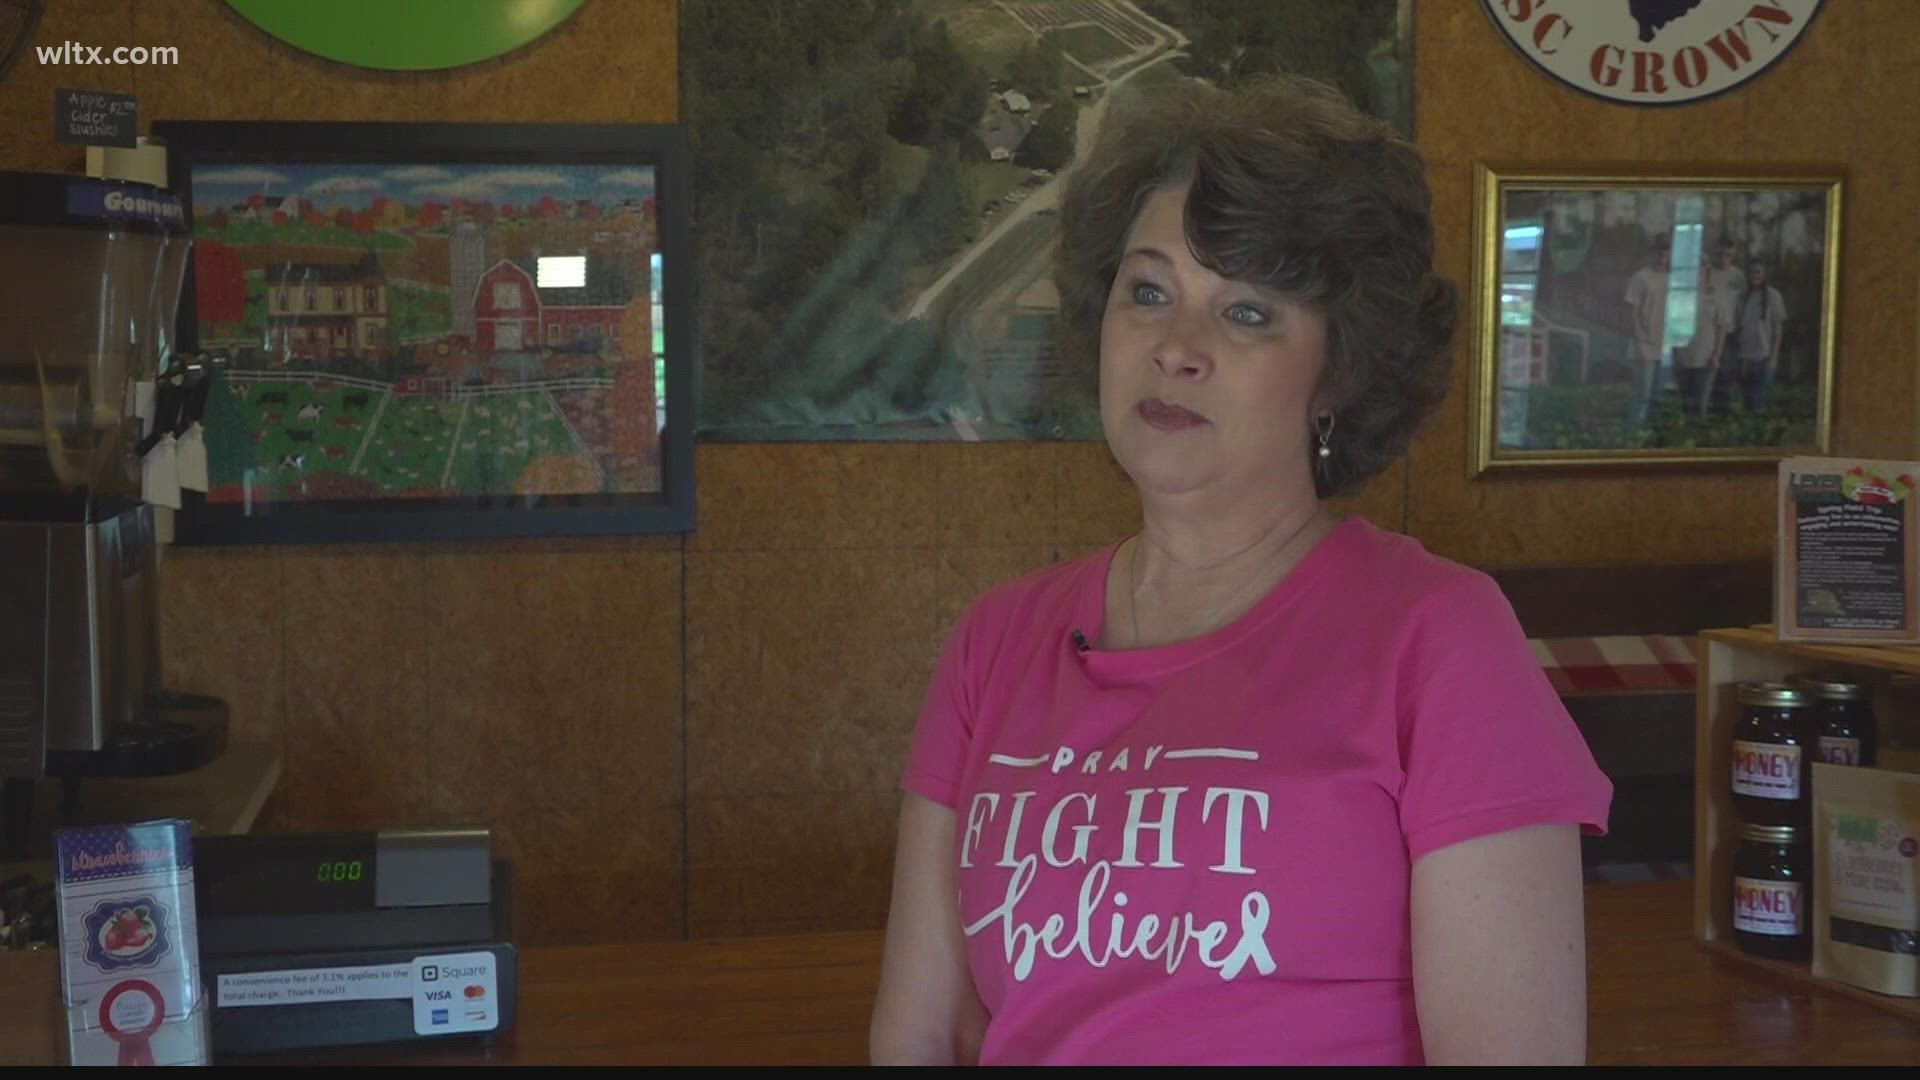 Tonight's survivor found a lump six months after her mammogram, underscoring the importance of self breast exams.